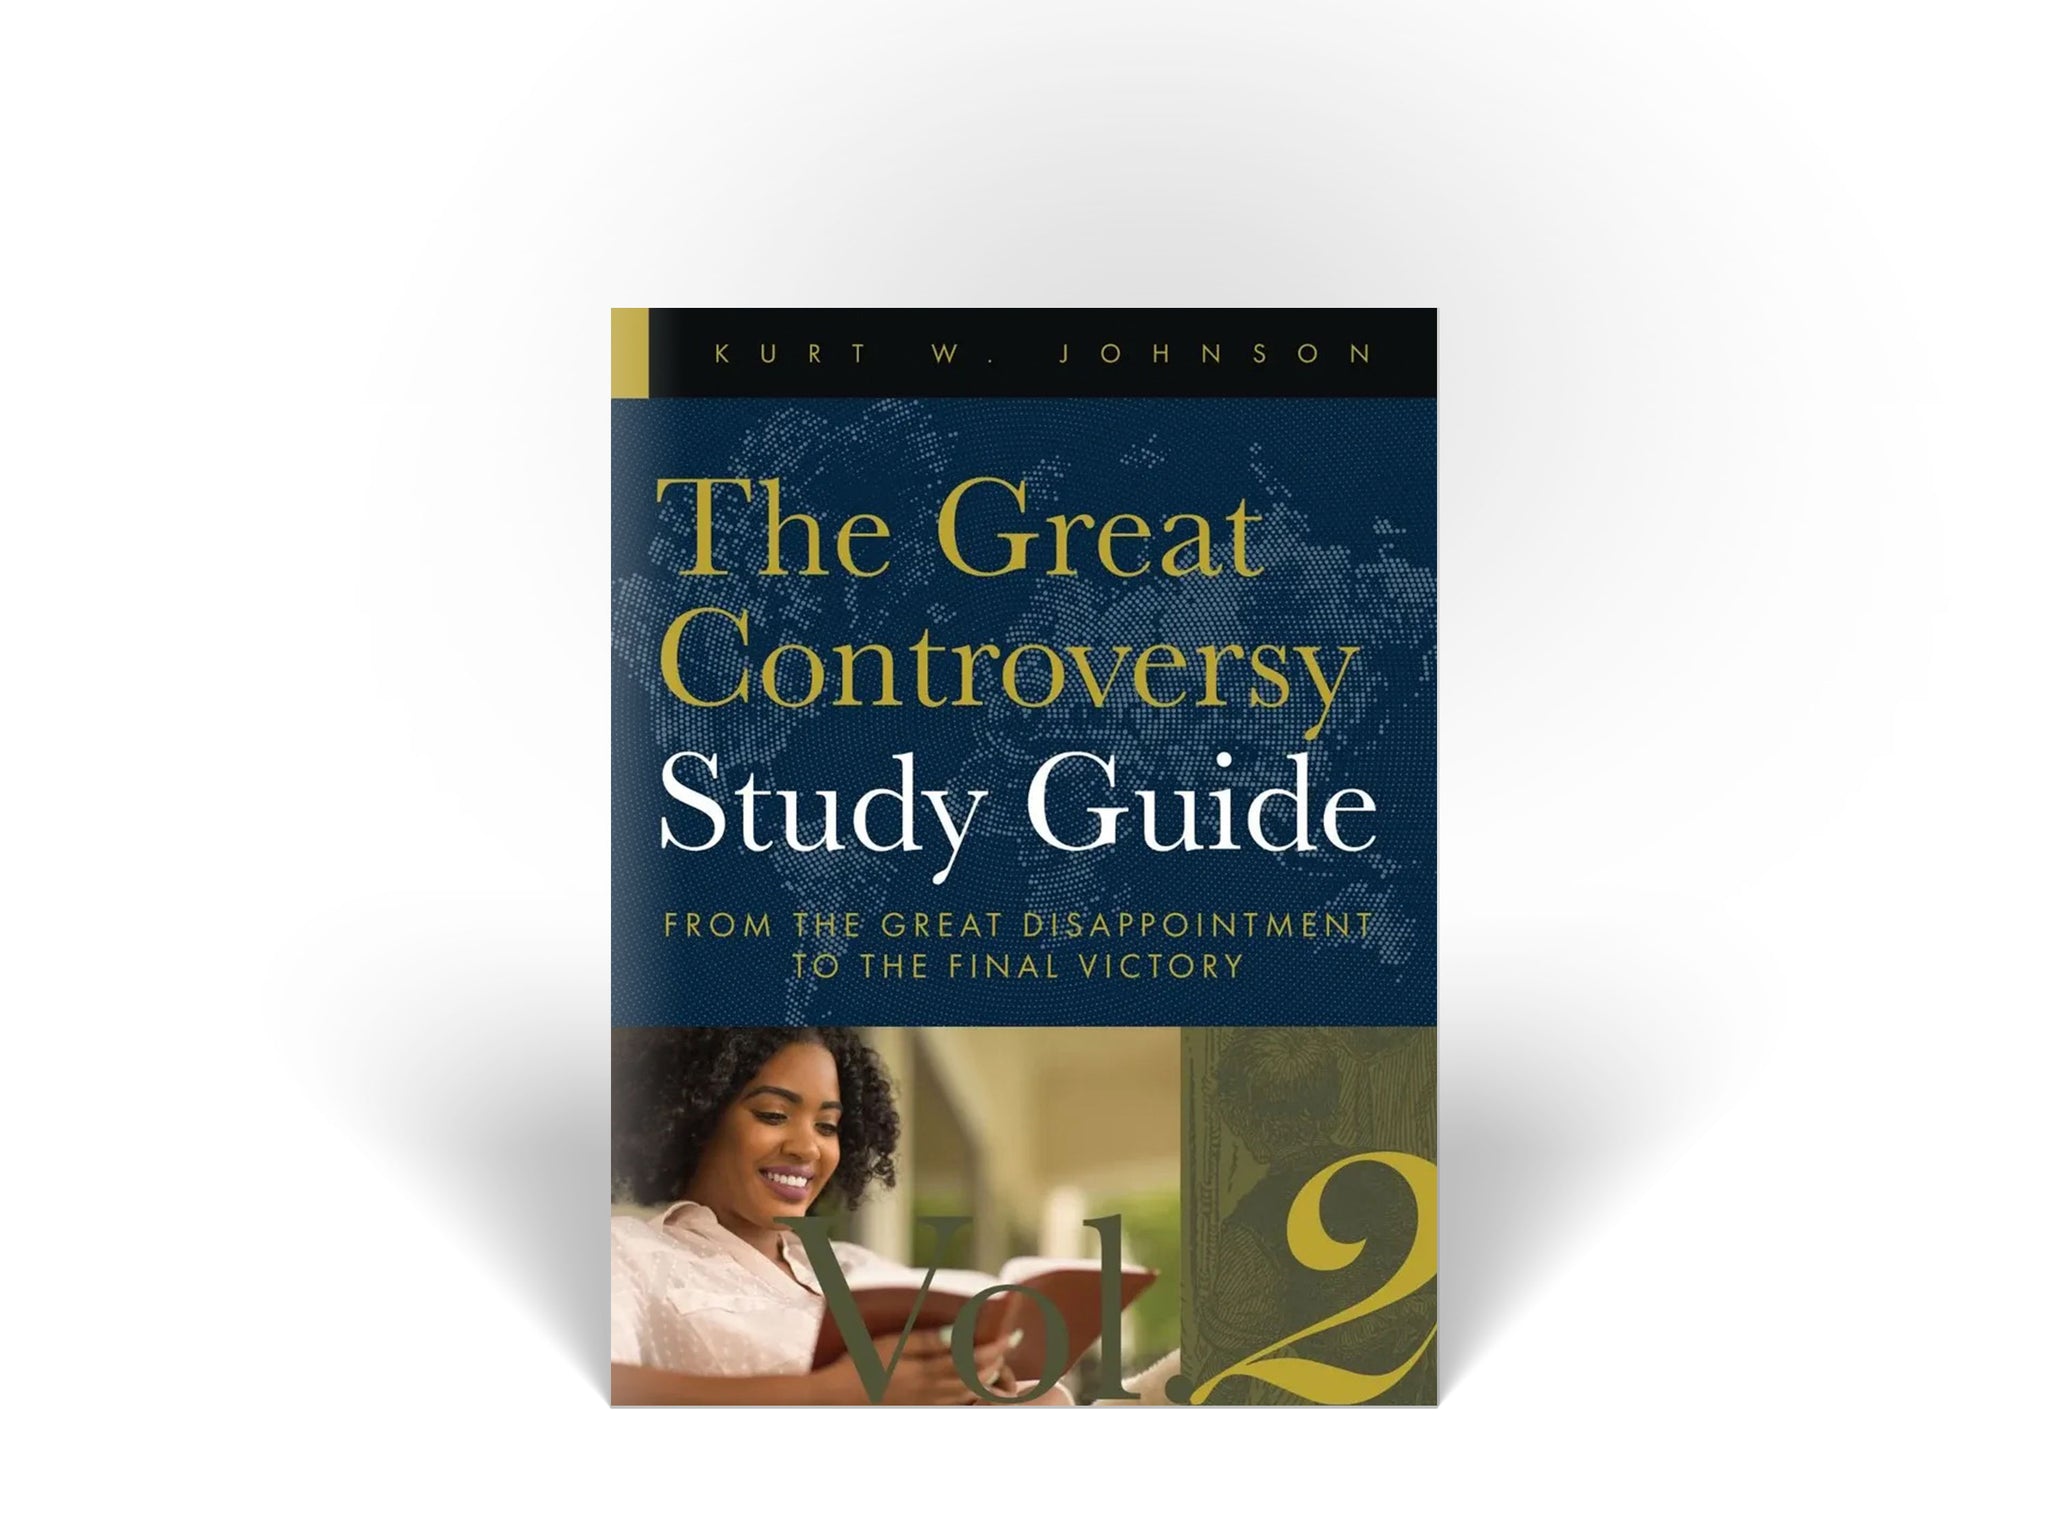 The Great Controversy Study Guide: From the Great Disappointment to the Final Victory (Volume 2)